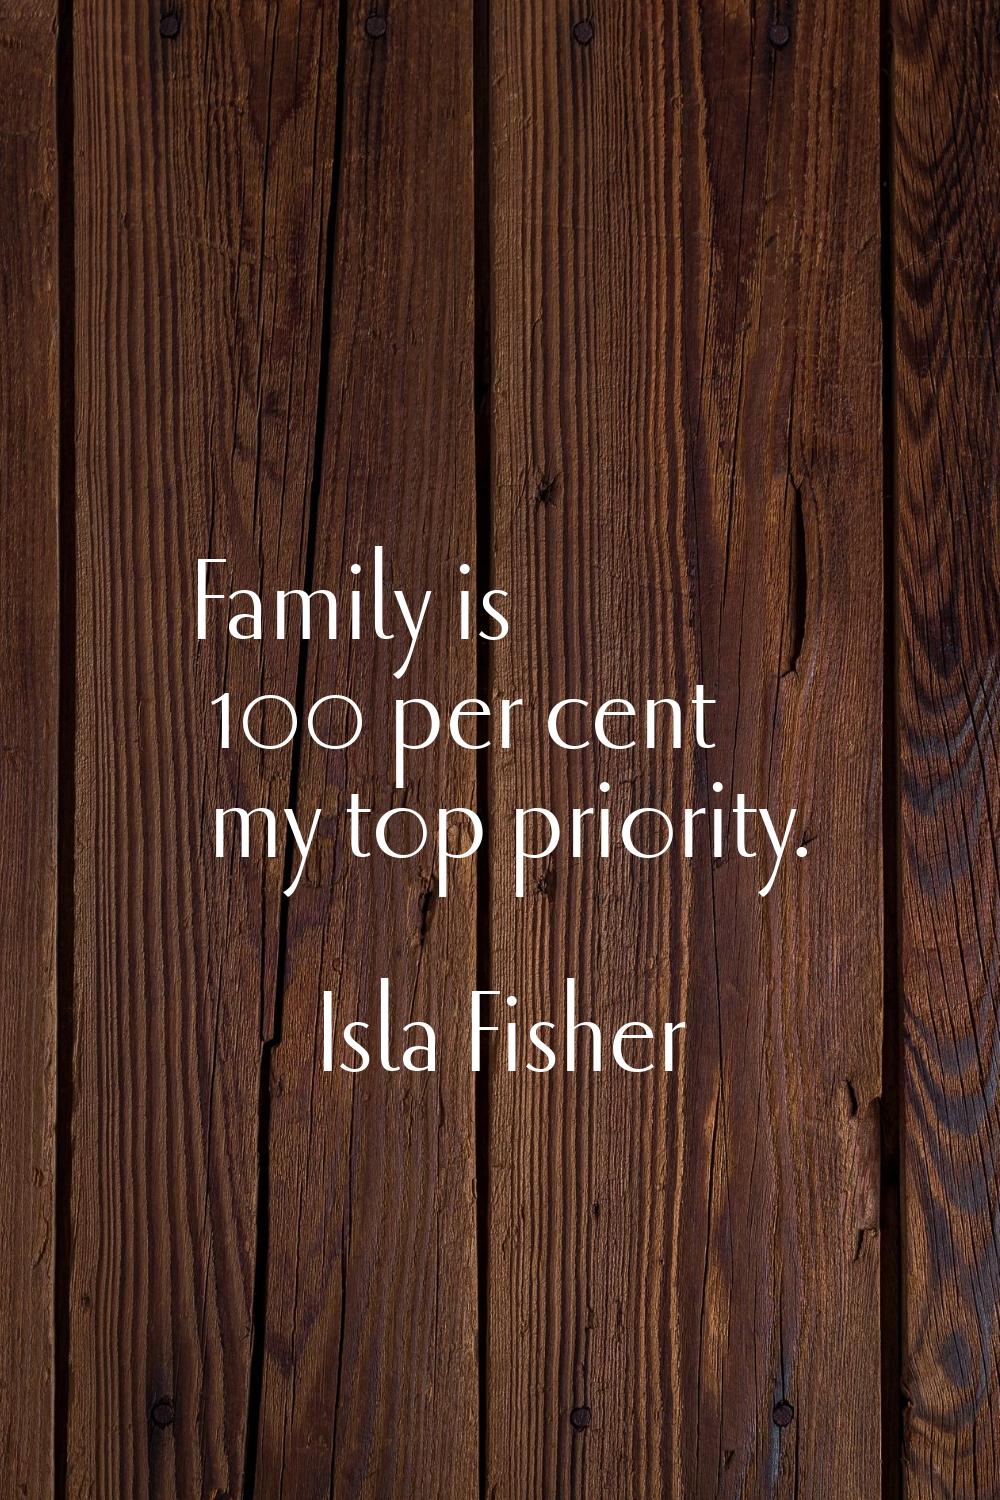 Family is 100 per cent my top priority.